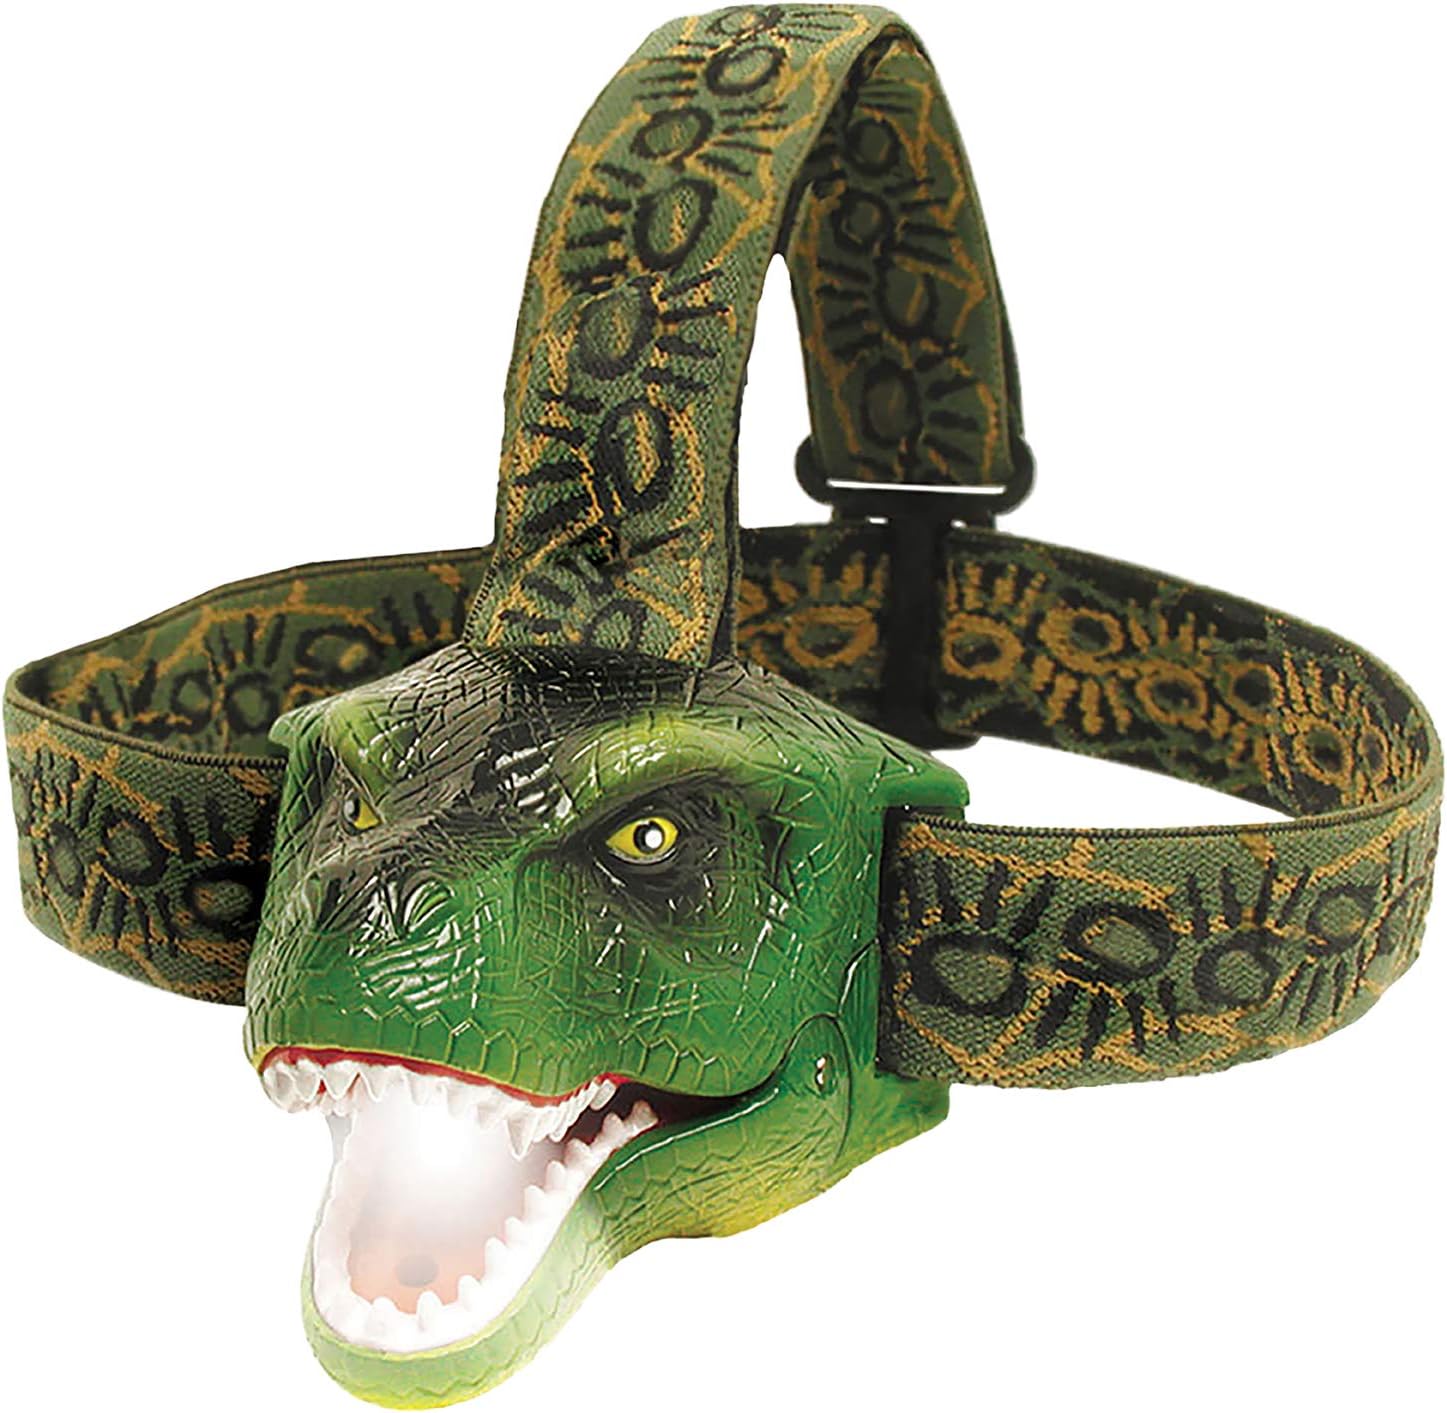 The Original DinoBryte LED Headlamp – T-Rex Dinosaur Head Lamp for Kids | Dinosaur Toy Headlight Flashlight for Boys, Girls, or Adults | Roaring Dino Head Light for Camping, Hiking, Party, or Reading